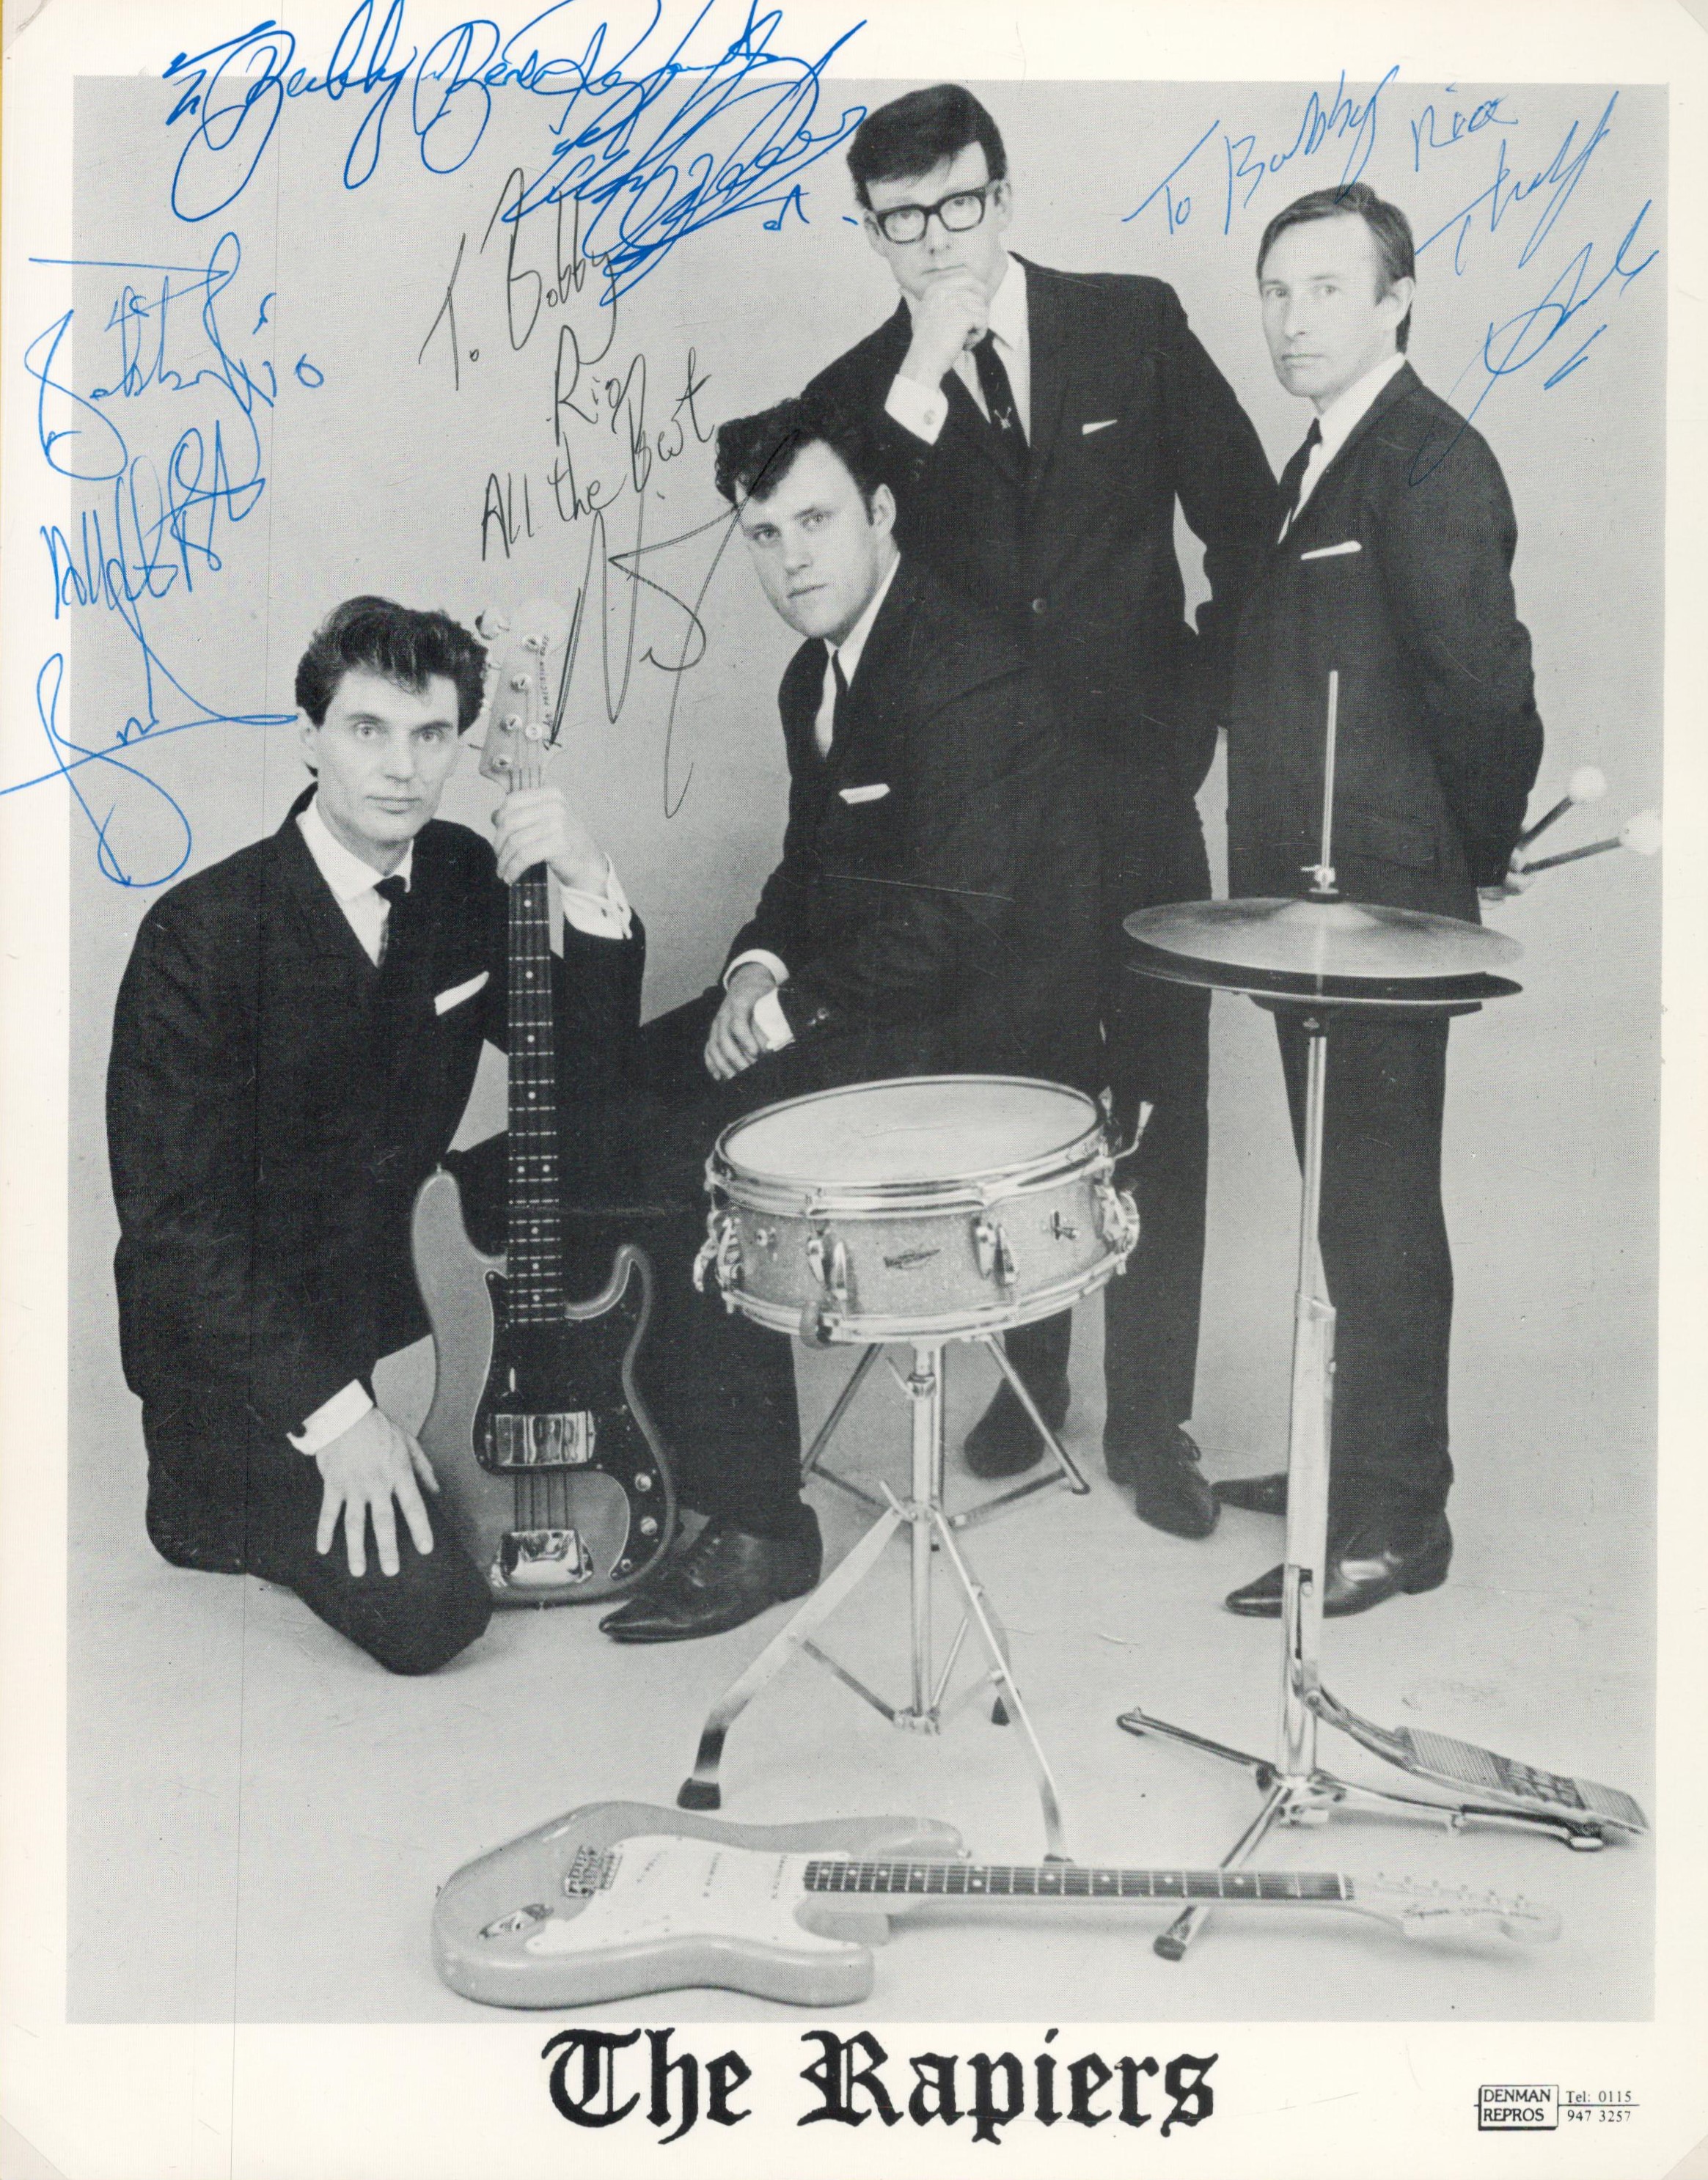 The Rapiers multi signed 10x8 inch vintage black and white promo photo includes the four original